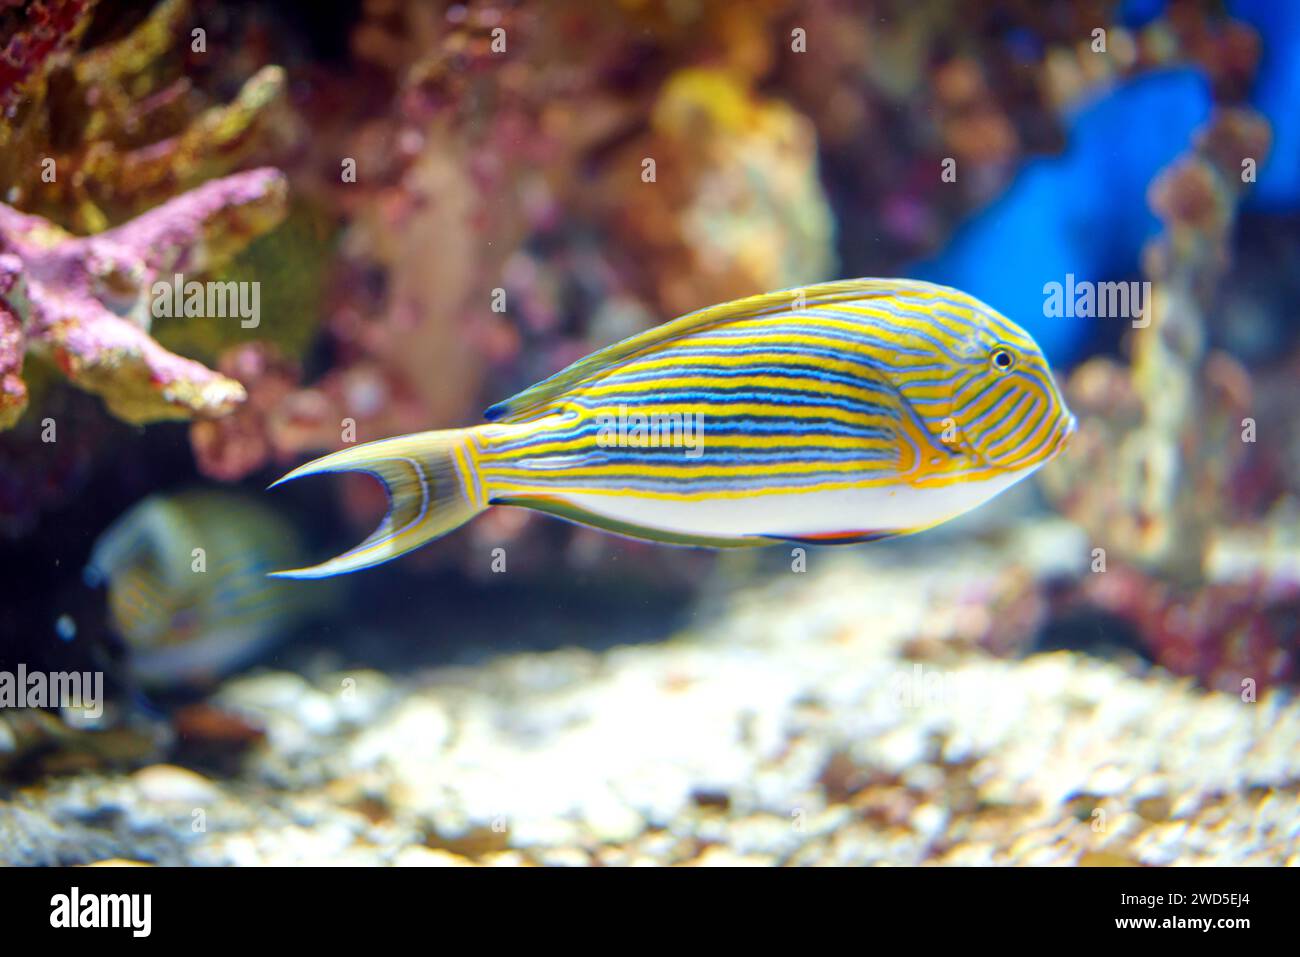 Lined surgeonfish Acanthurus lineatus gracefully navigating their underwater realm encapsulates the vibrant beauty of marine lif Stock Photo